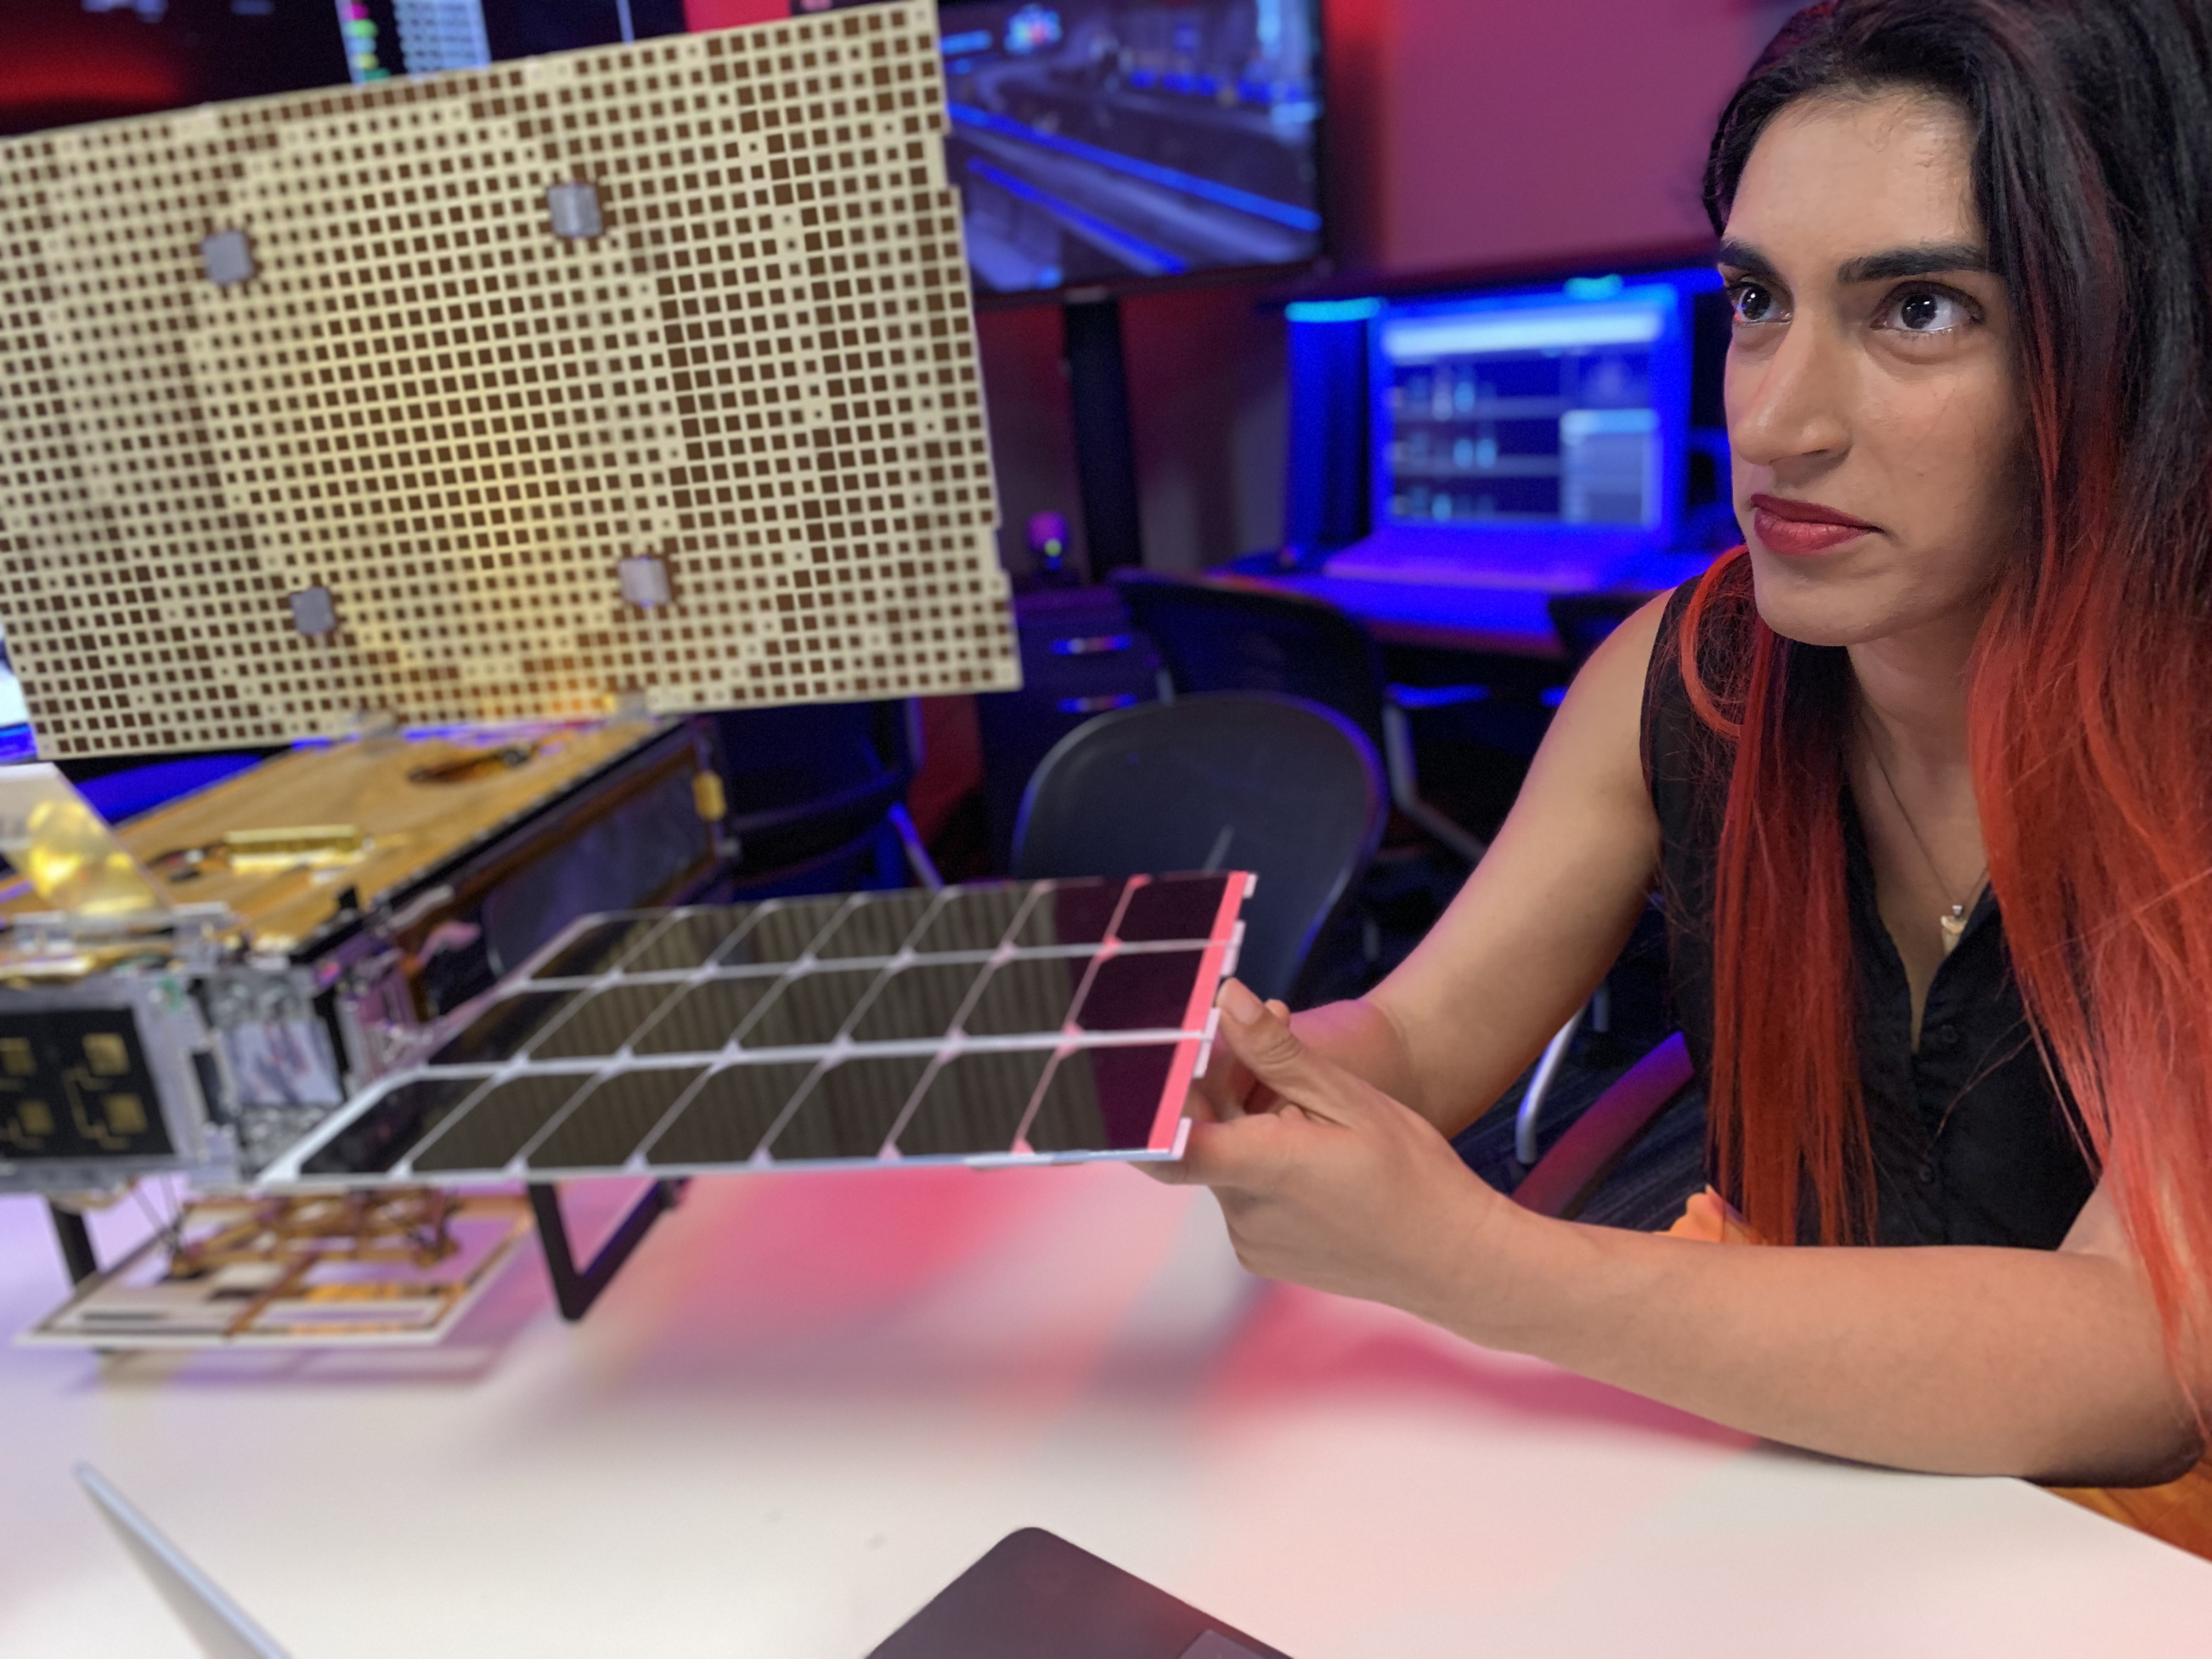 JPL systems engineer Farah Alibay works on all aspects of space missions